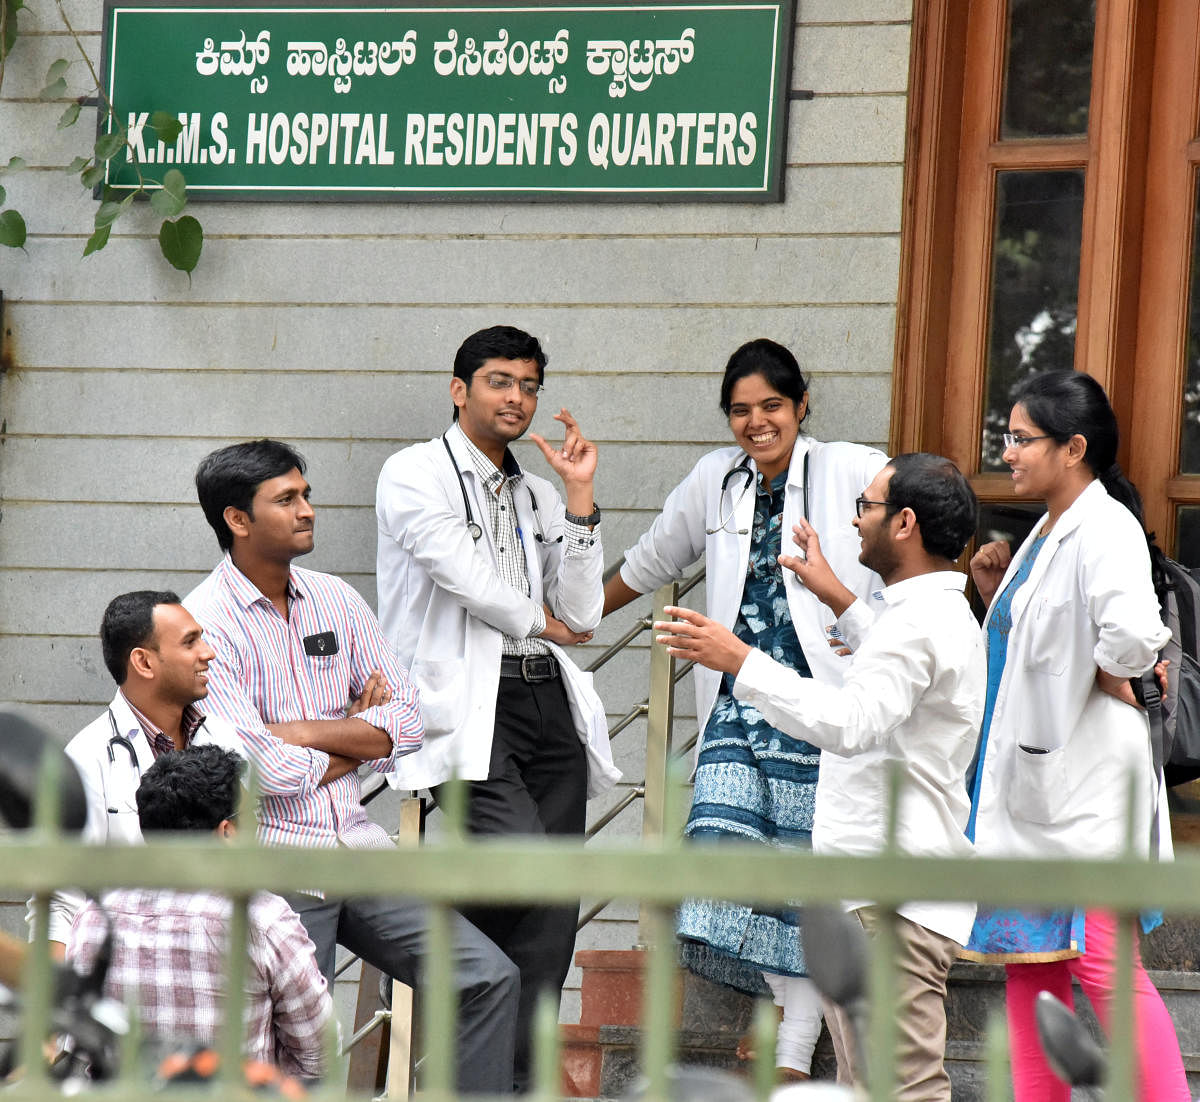 Doctors interacts together during a strike against Private Medical Establishments (Amendment) Bill by Karnataka government at KIMS hospital in Bengaluru on Friday. Photo by Janardhan B K